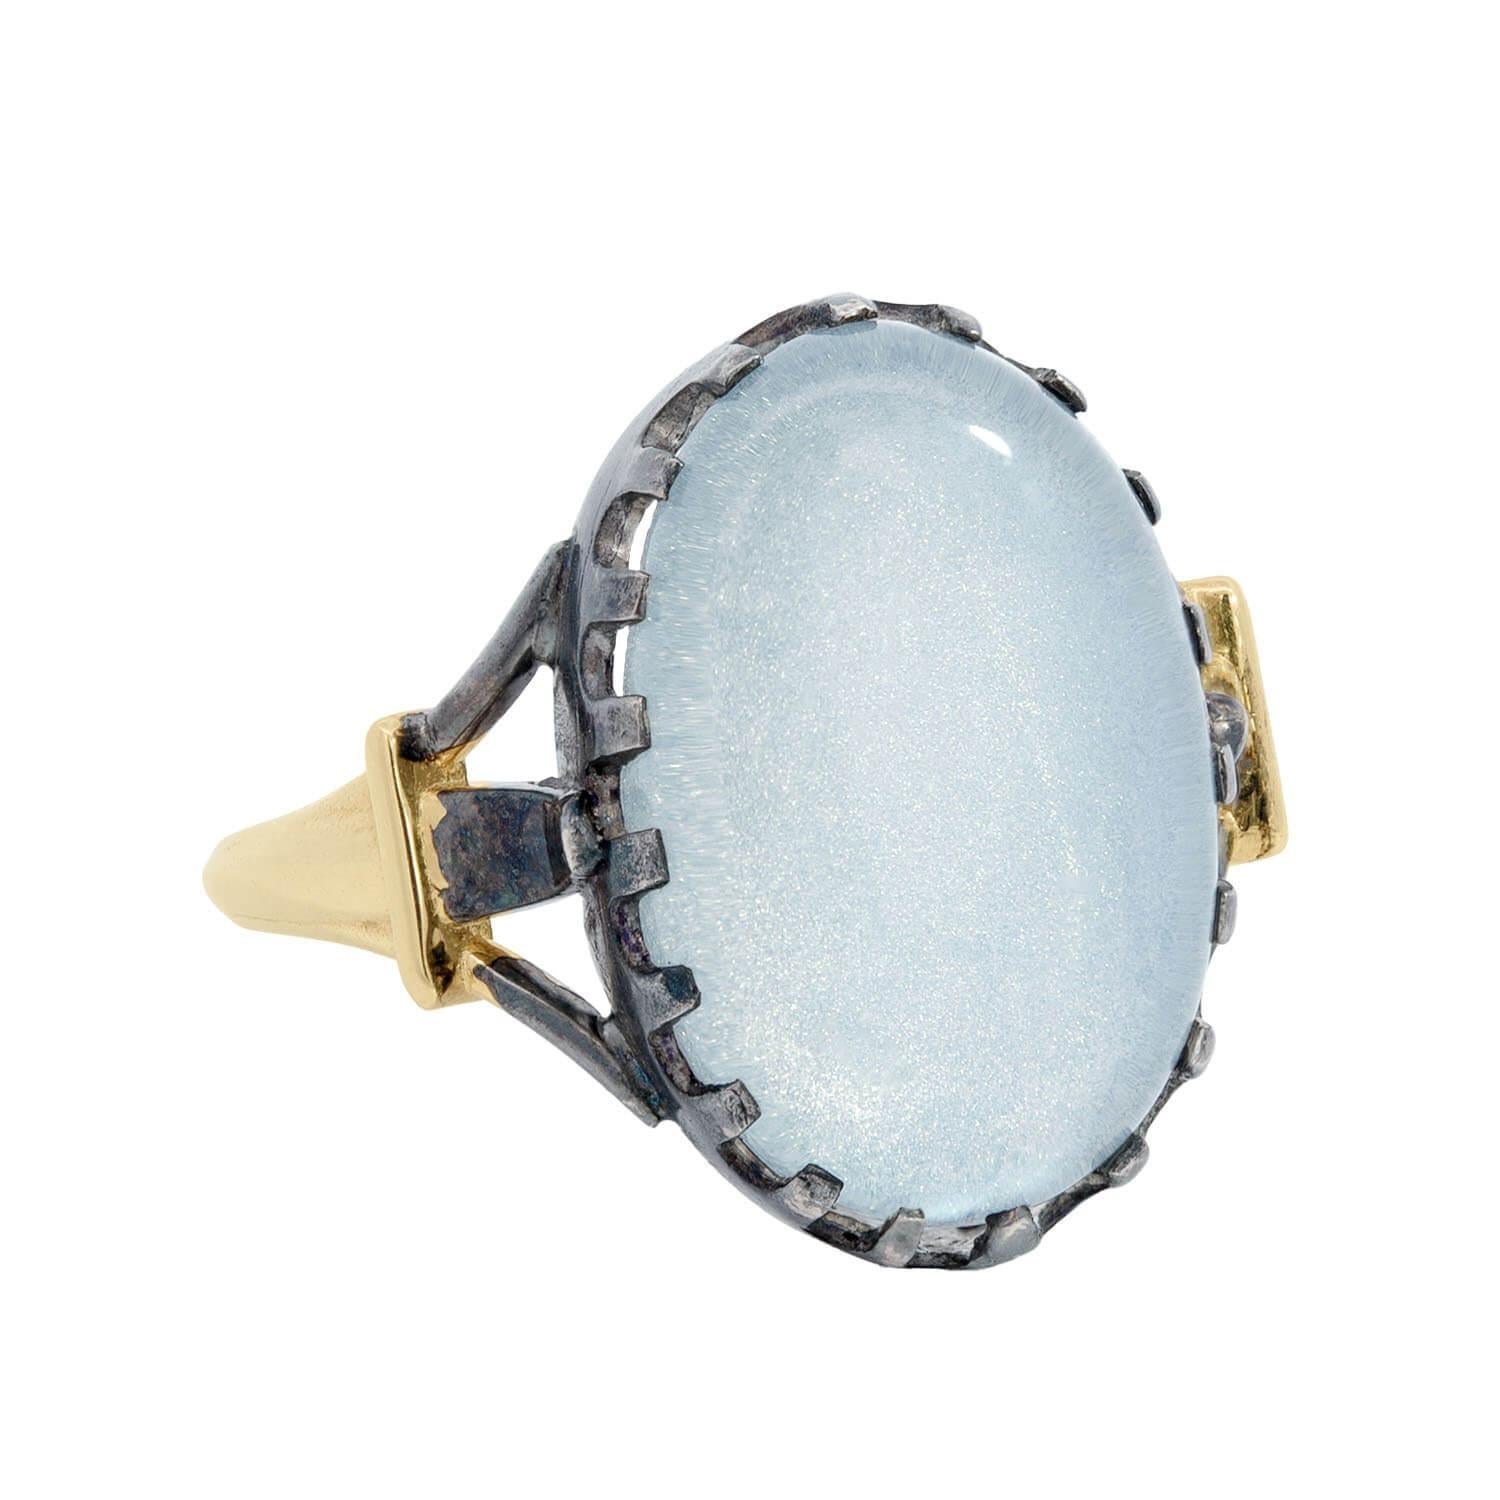 A beautiful moonstone ring from the Victorian (ca1880) era! This lovely ring is made of 14kt yellow gold holds a moonstone cabochon at its center in a sterling silver mounting. The elongated moonstone is oval in shape and has a wonderful pearly